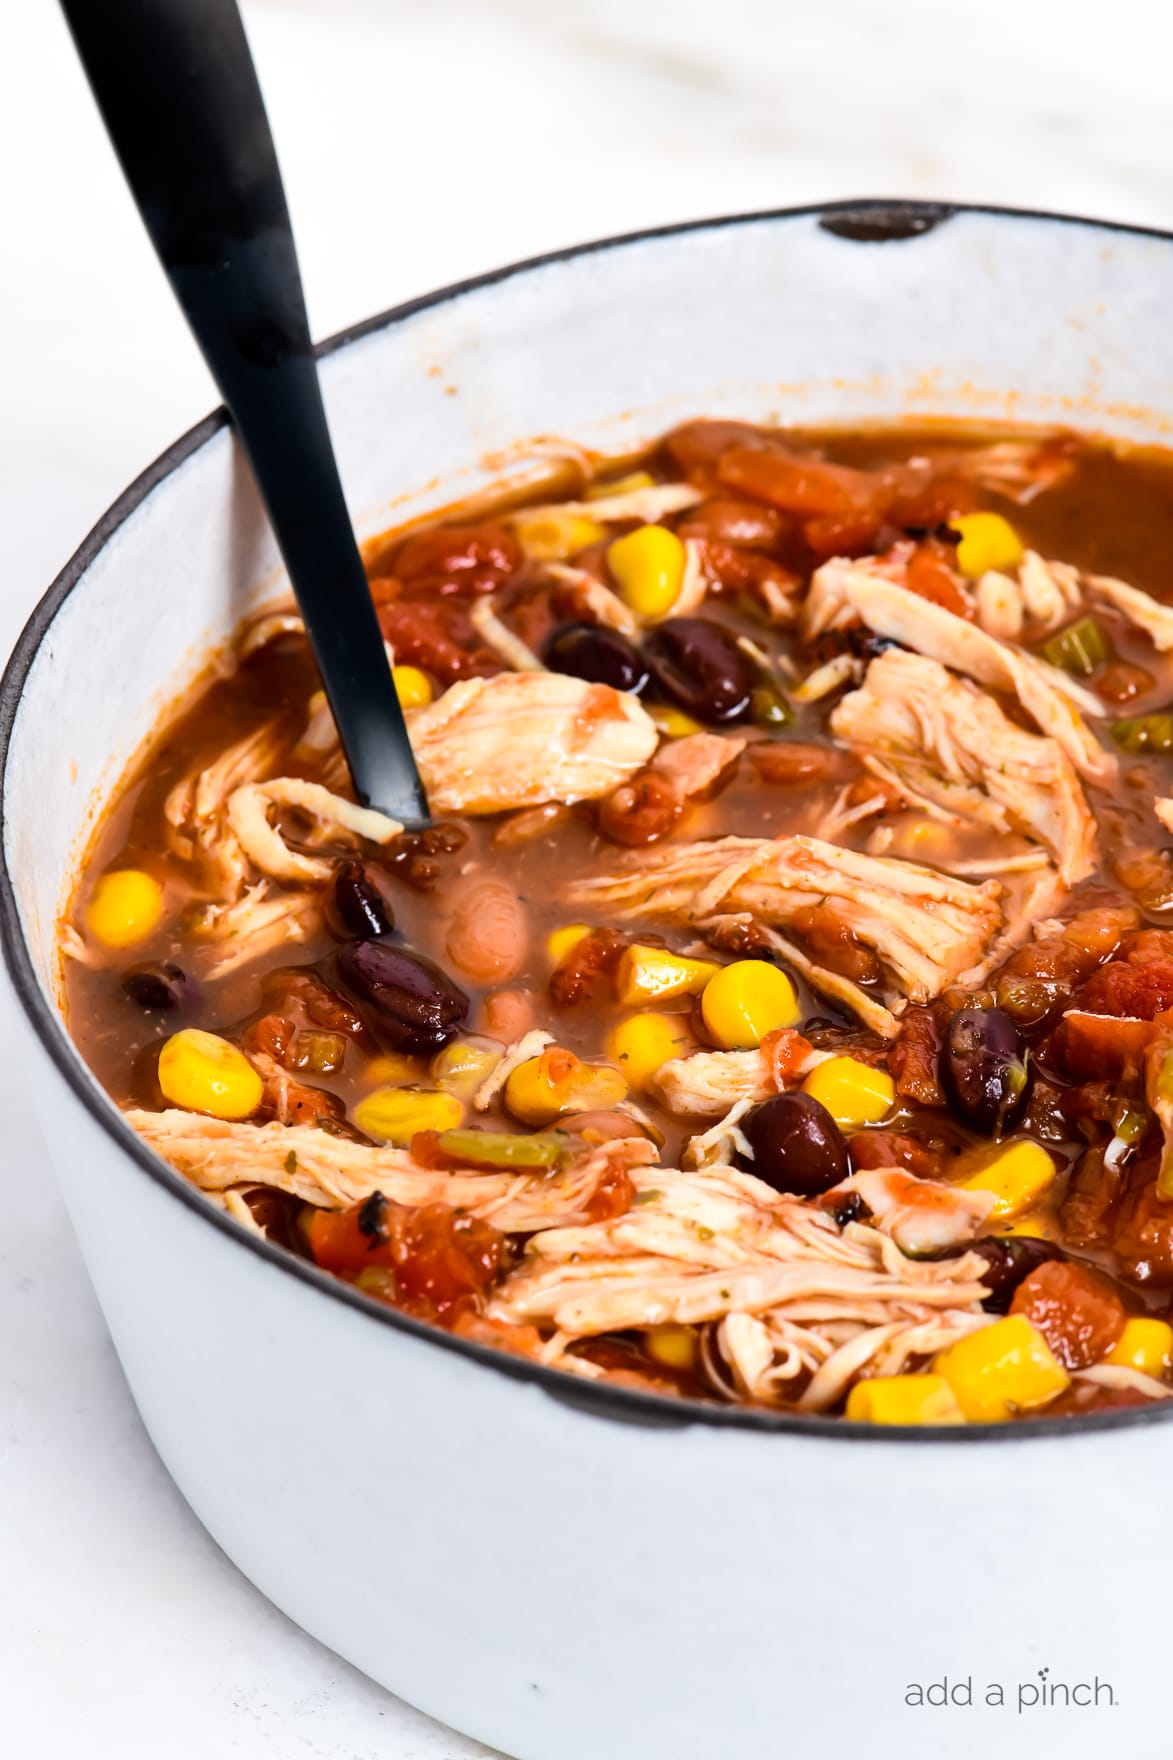 Chicken Taco Soup Recipe - So quick and easy, this chicken taco soup recipe is flavorful and delicious! Made with chicken, beans, corn, it is on the table in less than 30 minutes! // addapinch.com